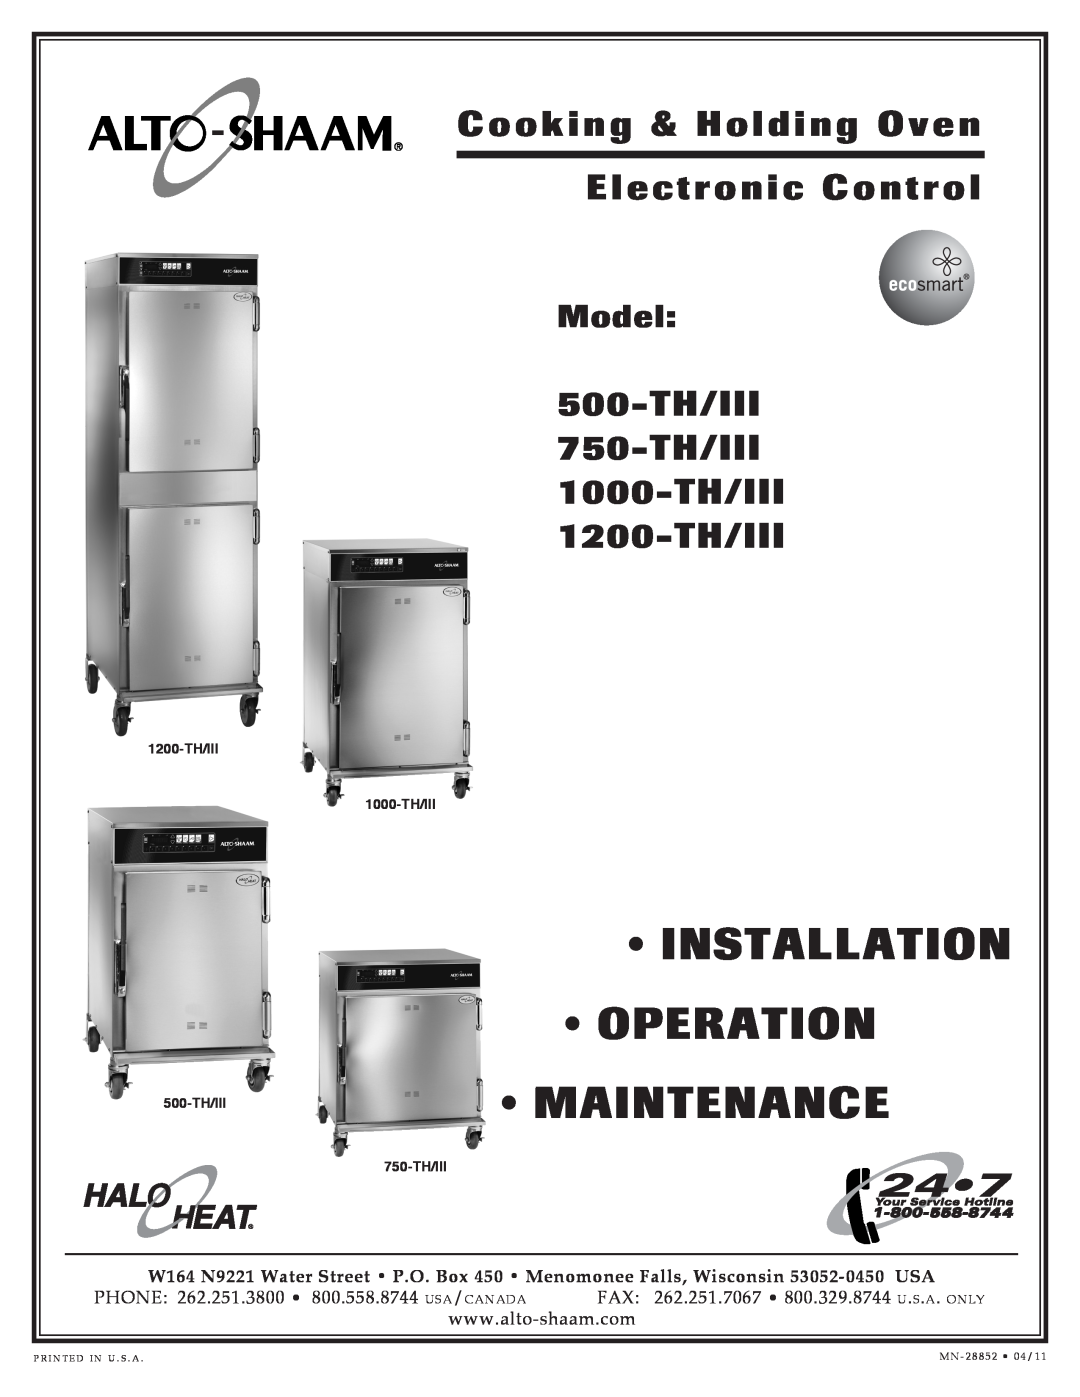 Alto-Shaam 1000-TH/III specifications 1000- TH, Low Temperature Electronic Cook & Hold Oven, Item No, Additional Fe Atures 